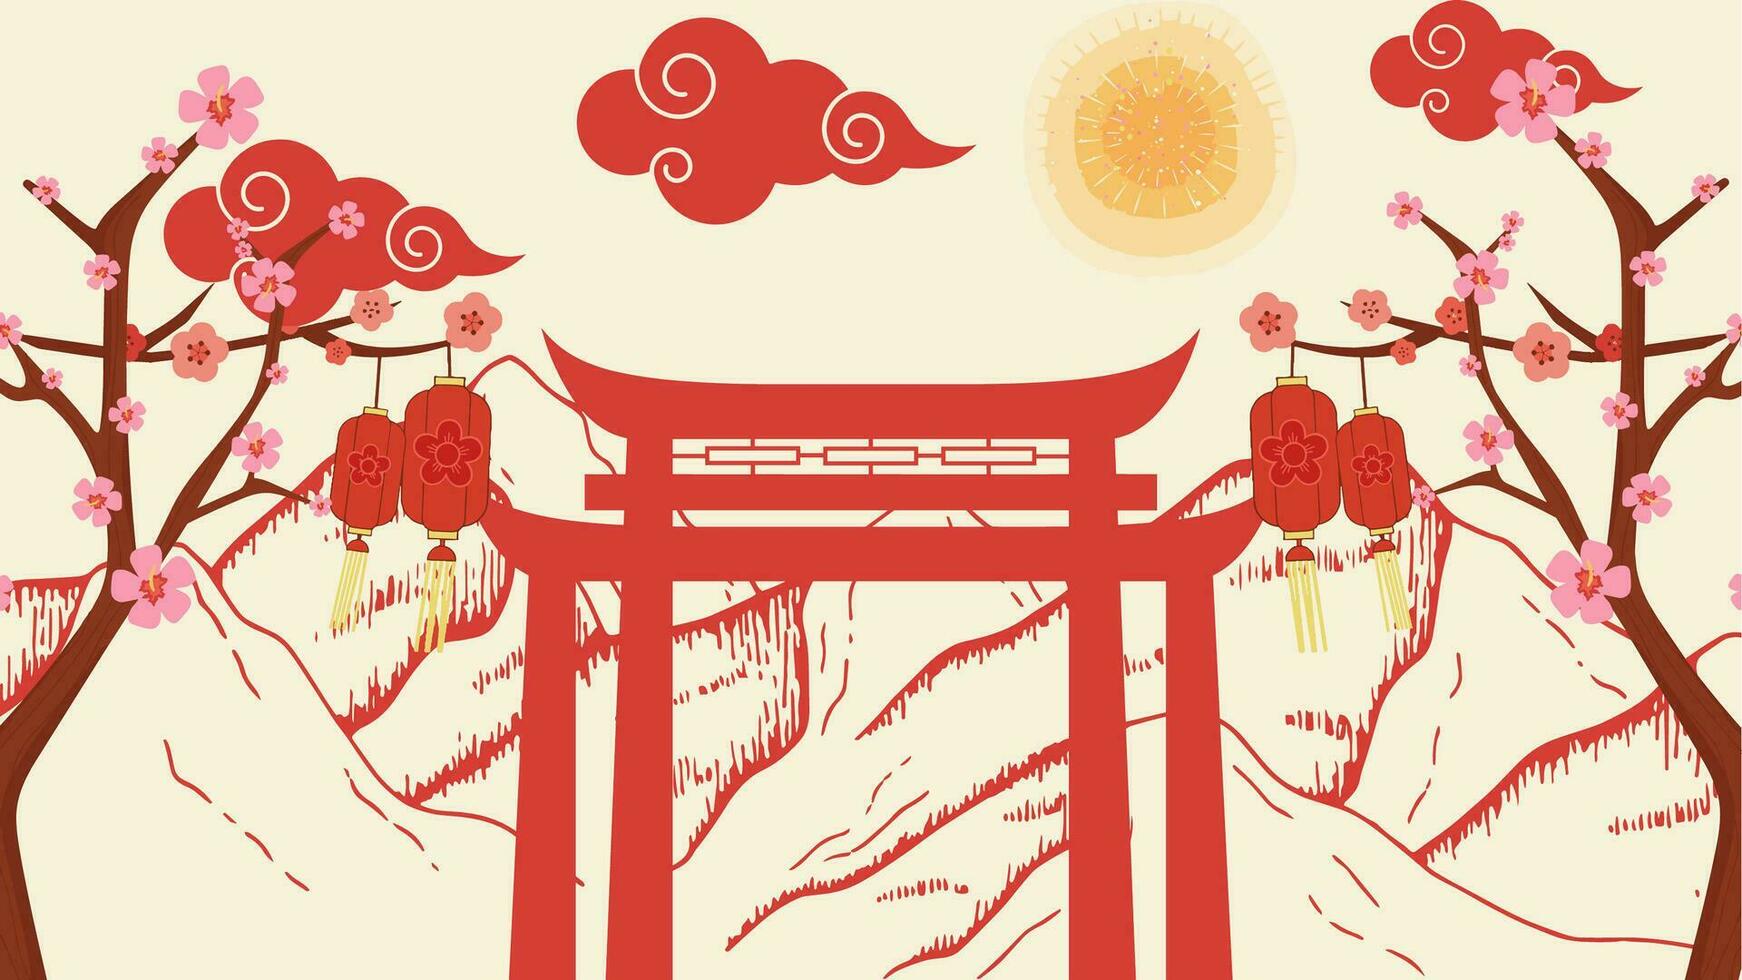 Vector graphic illustration of mountain views, gates, lantern, cherry blossom, chinese vibes. Suitable for celebrating Chinese New Year or other event.